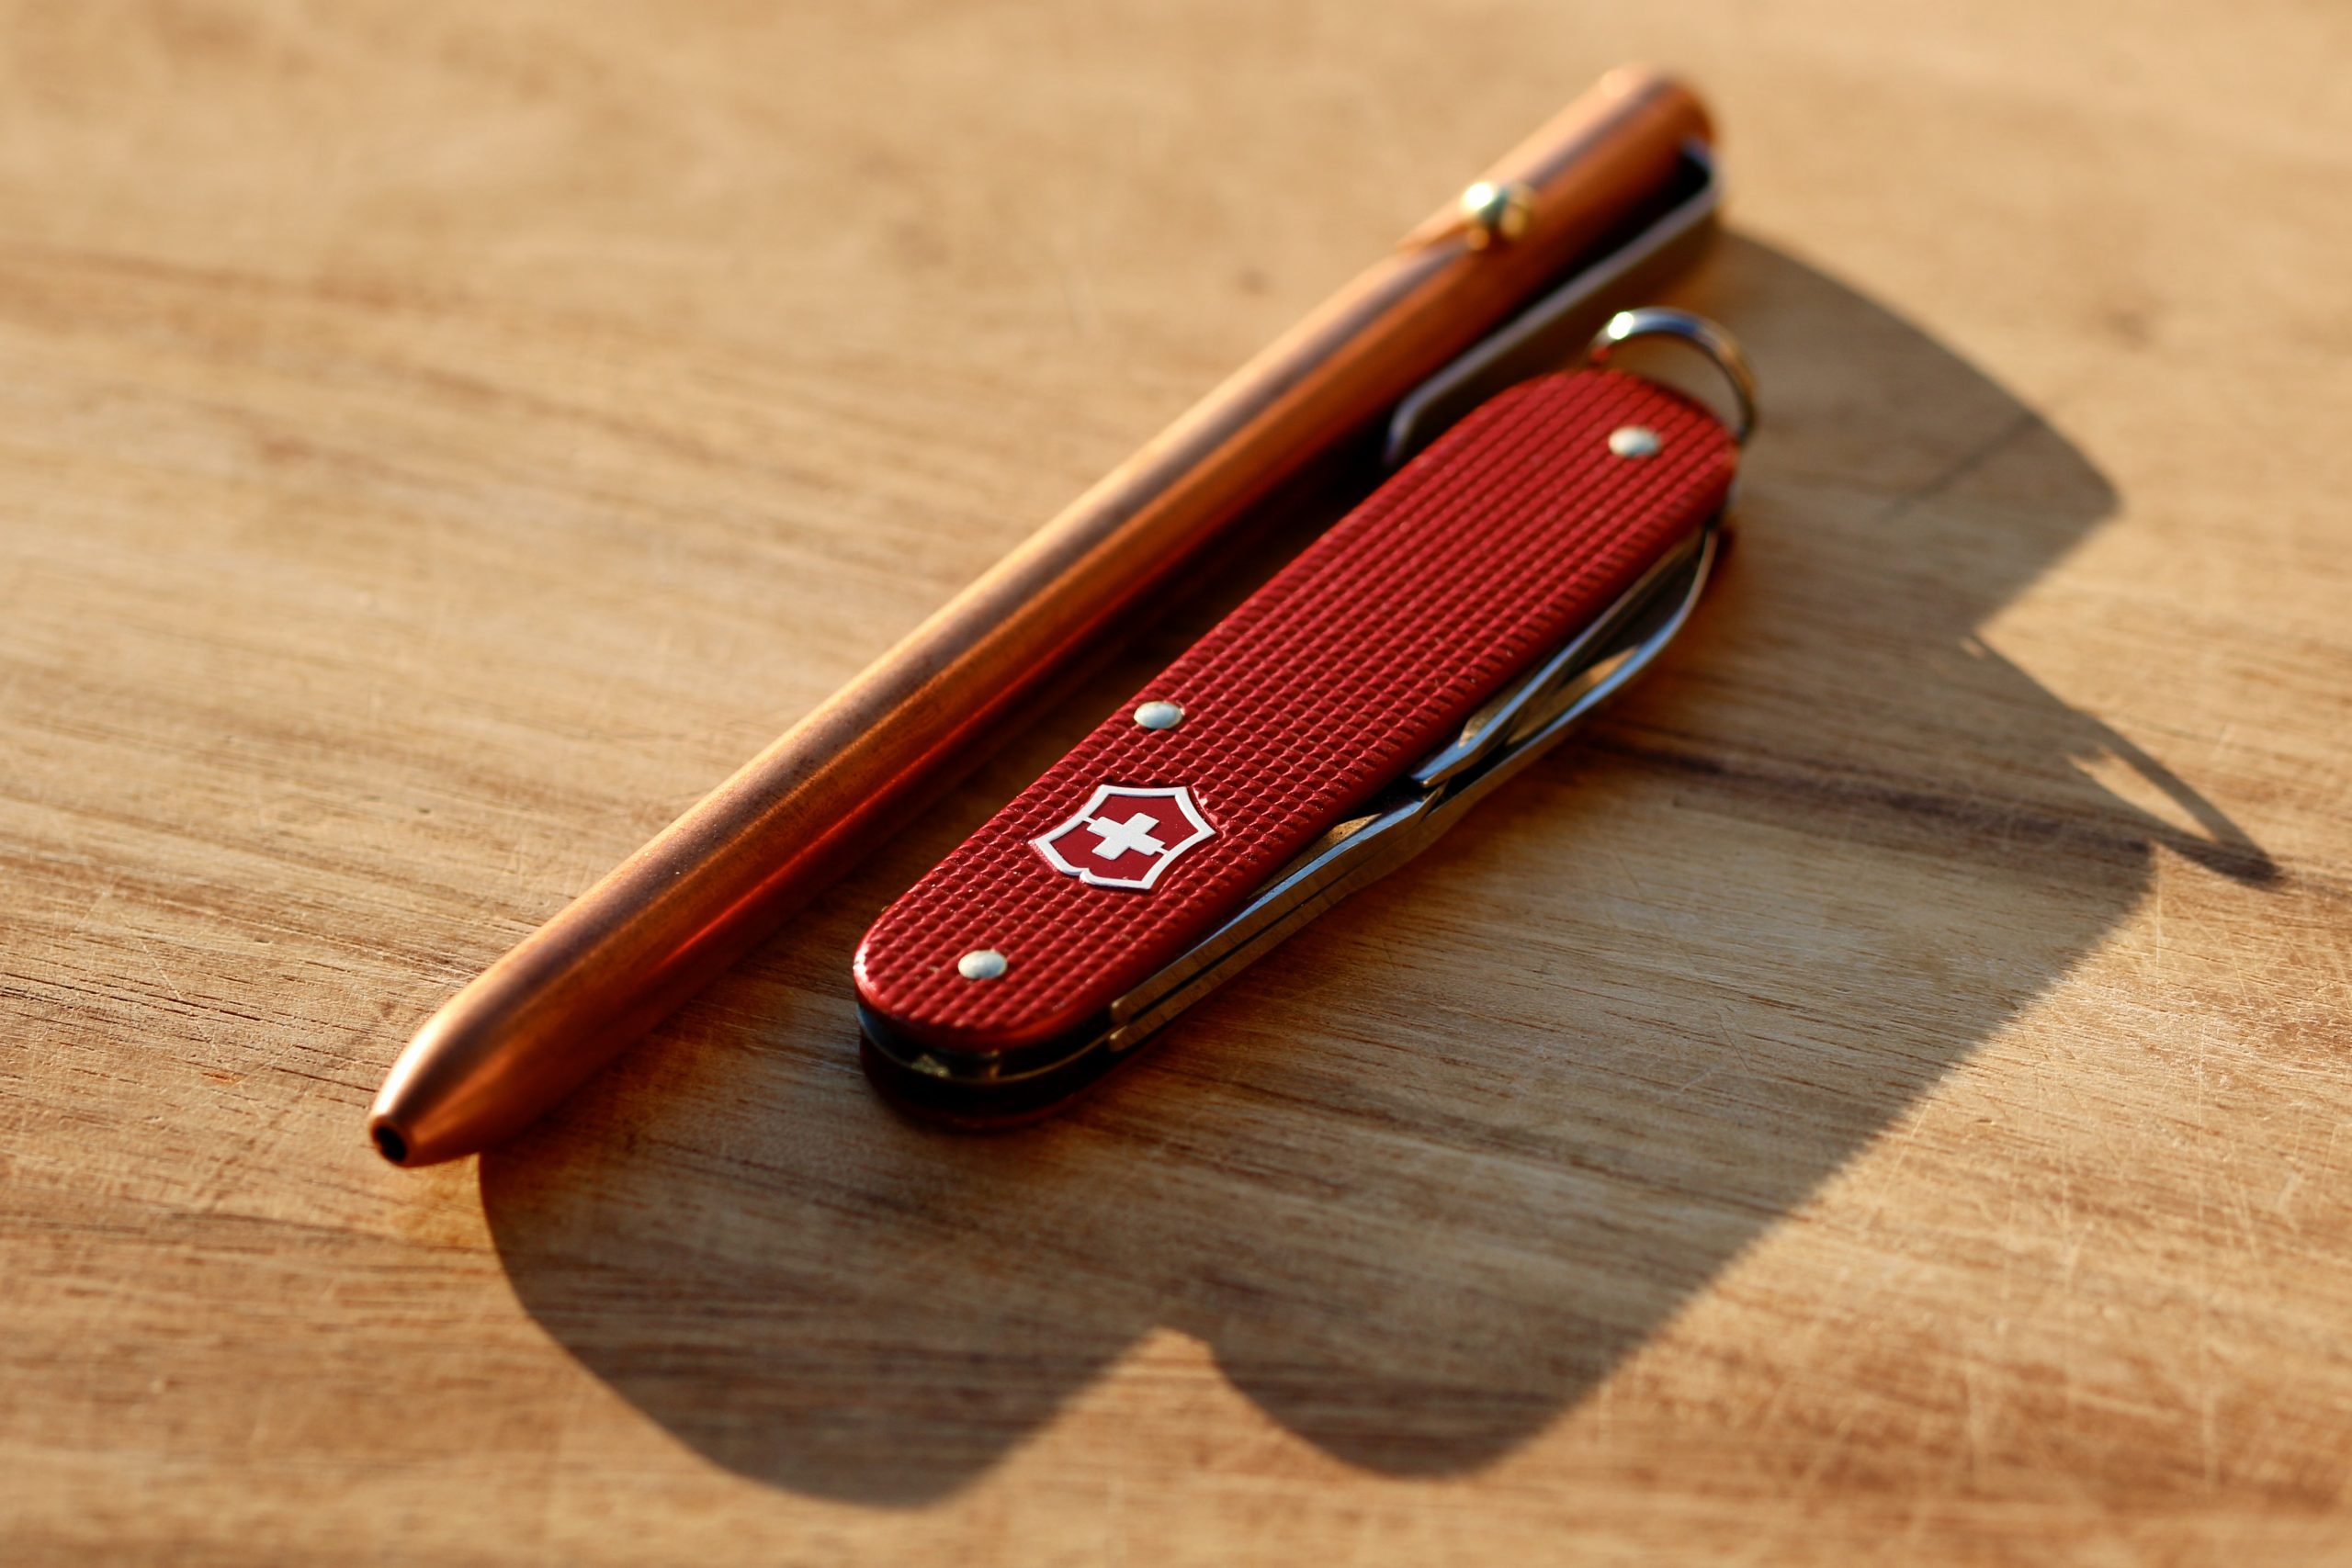 If you like well made things, the Victorinox is a good knife for you. And the pen, too--from HoneyBadger Arsenal. 